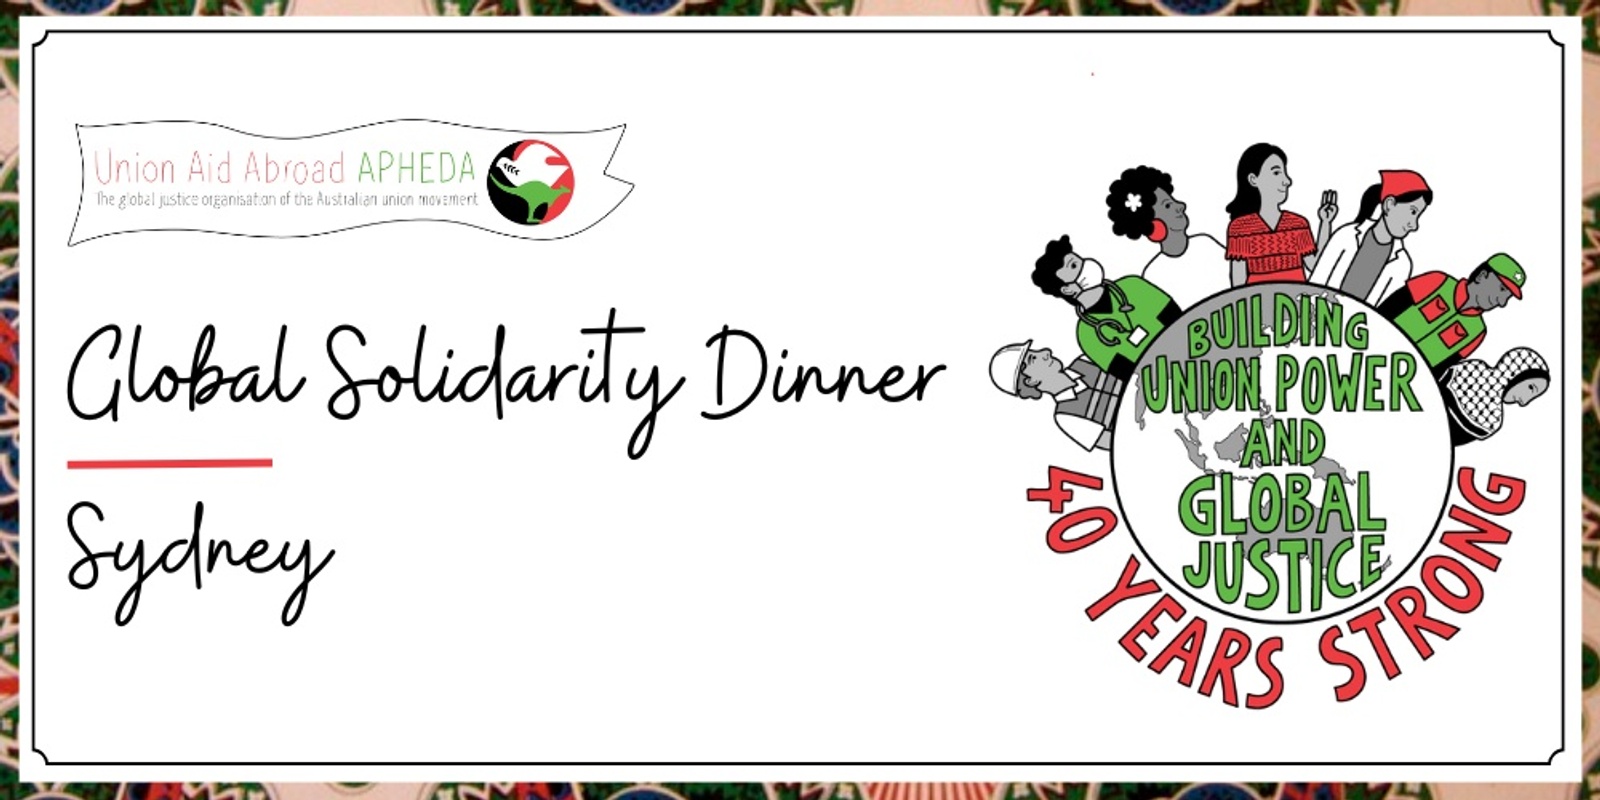 Banner image for 2024 Union Aid Abroad-APHEDA Sydney Dinner